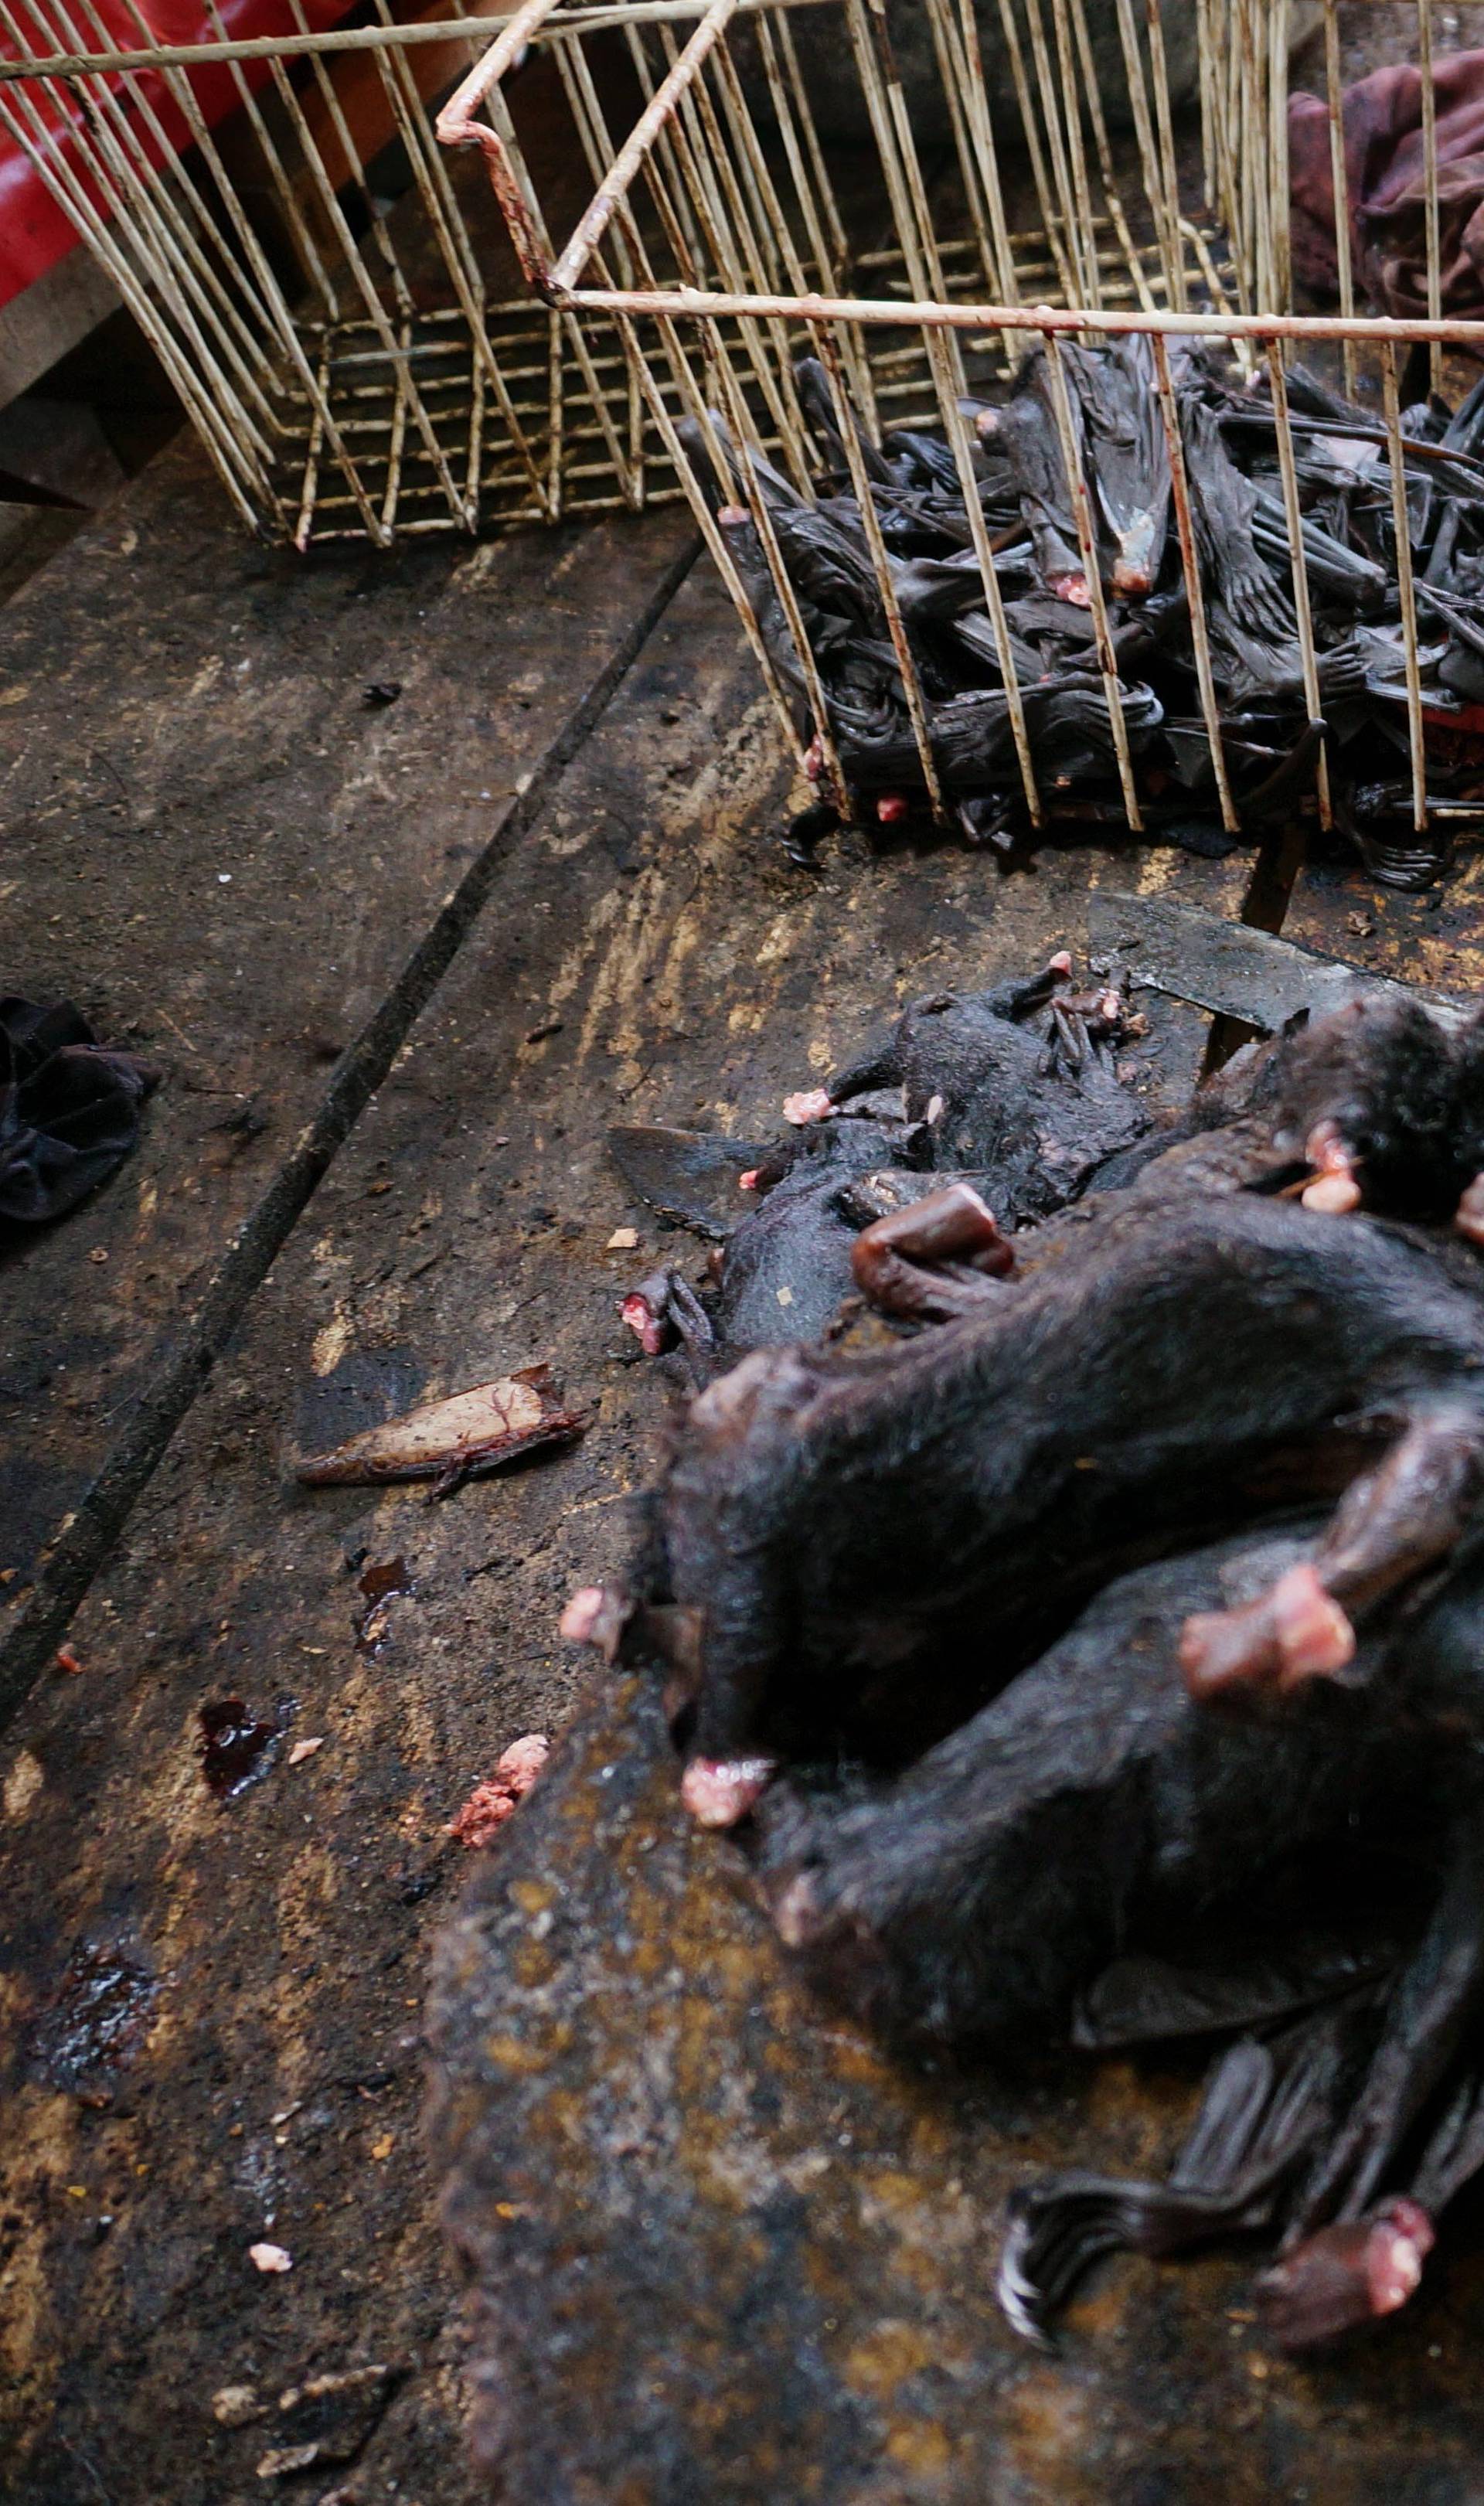 Endangered Animal Meat On Sale In Indonesia